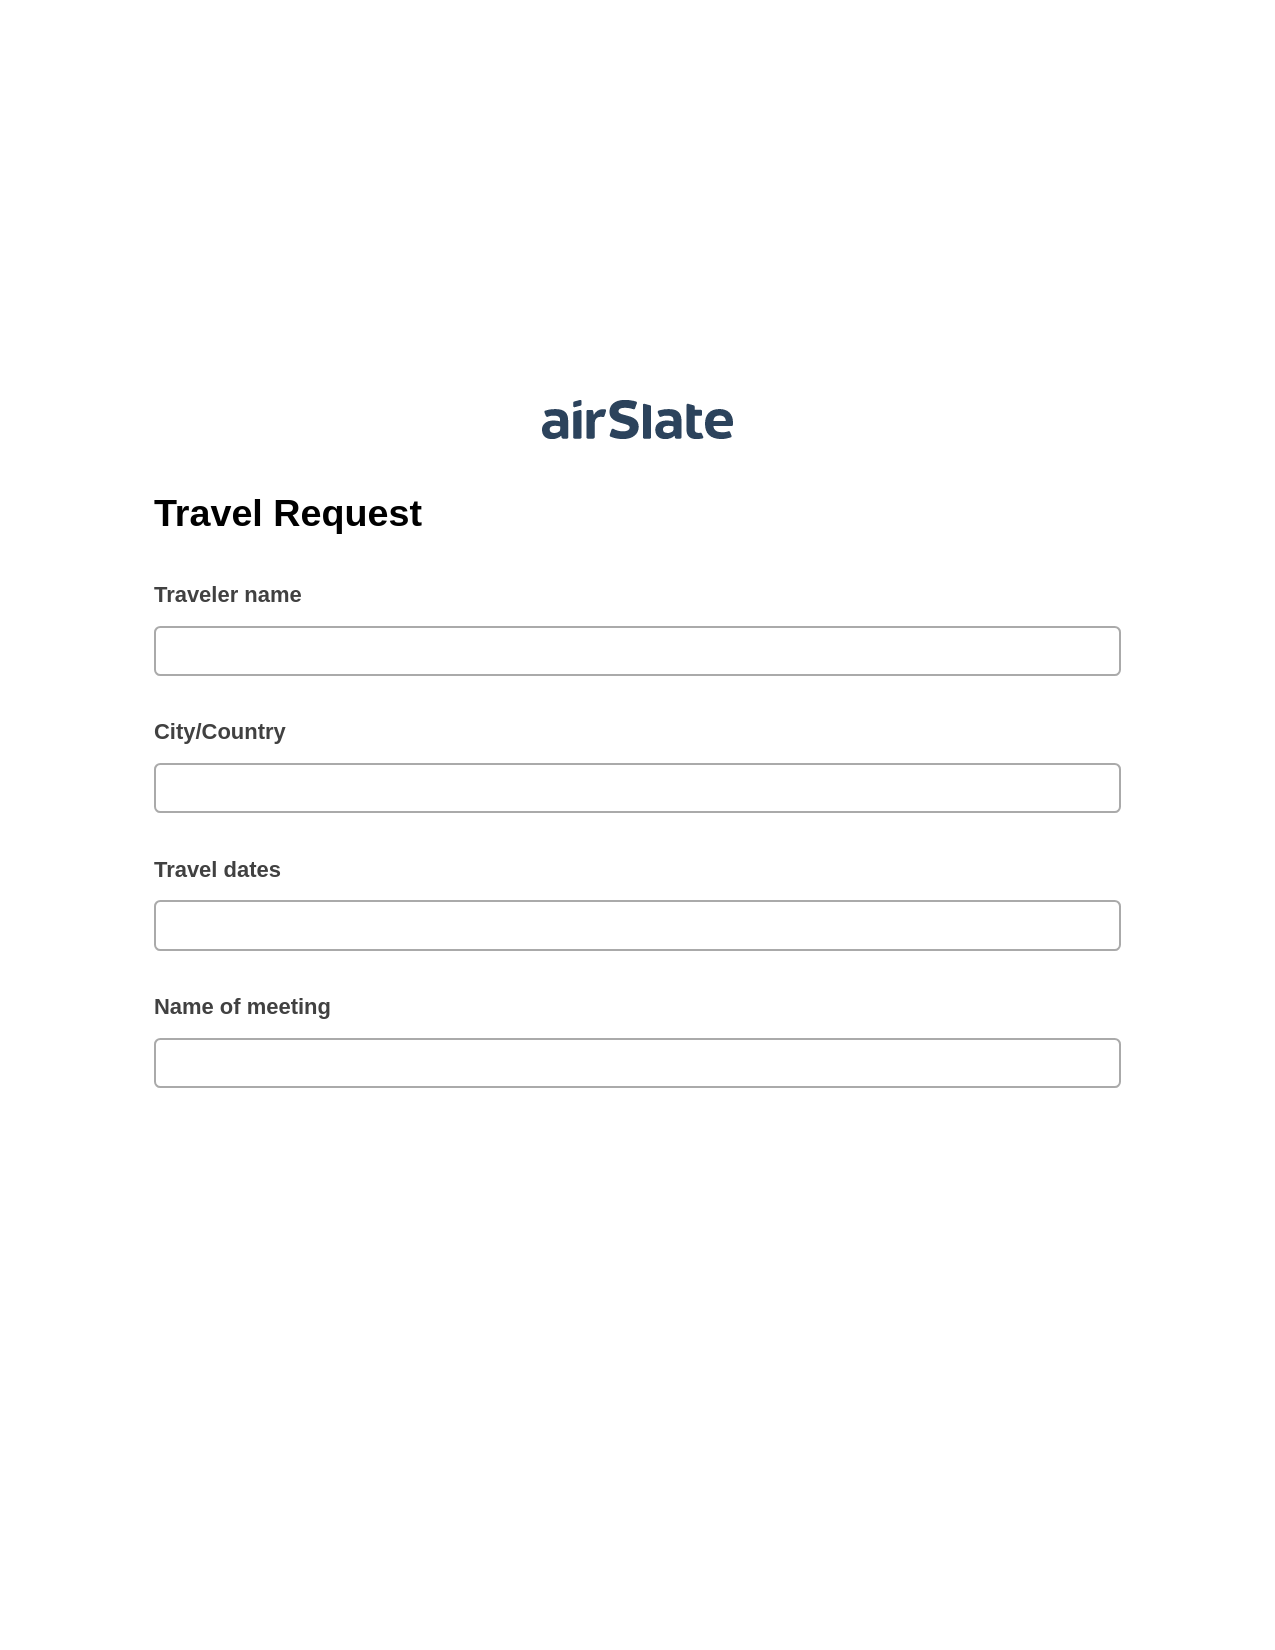 Travel Request Pre-fill from Smartsheet Bot, Send a Slate to MS Dynamics 365 Contact Bot, Export to Smartsheet